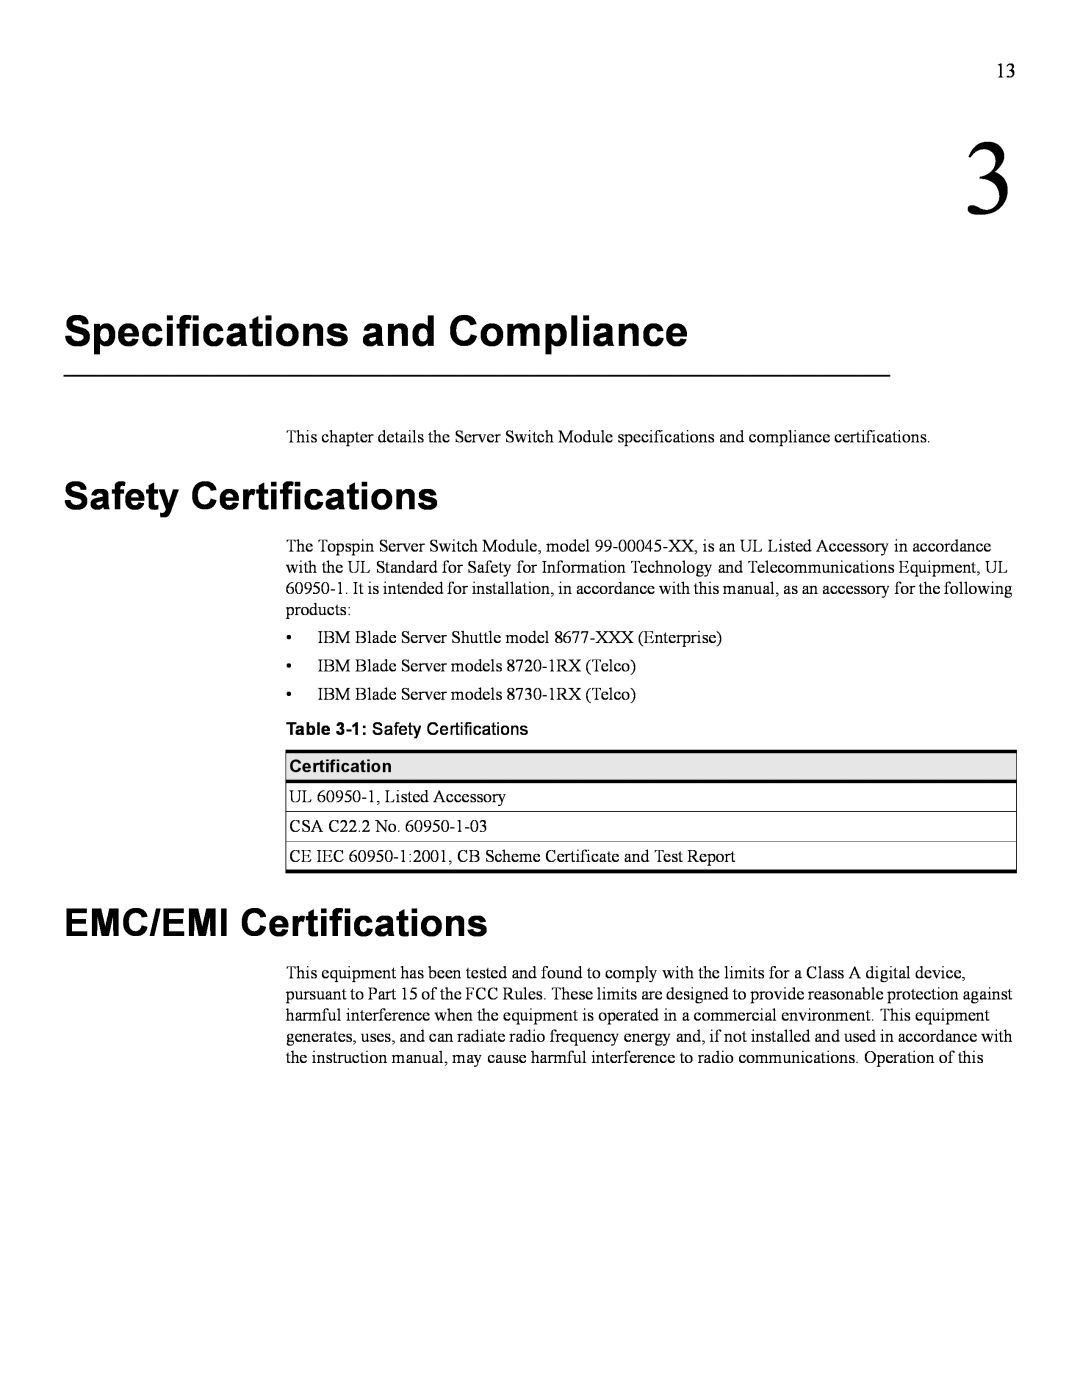 IBM 24R9718 IB manual Specifications and Compliance, Safety Certifications, EMC/EMI Certifications 